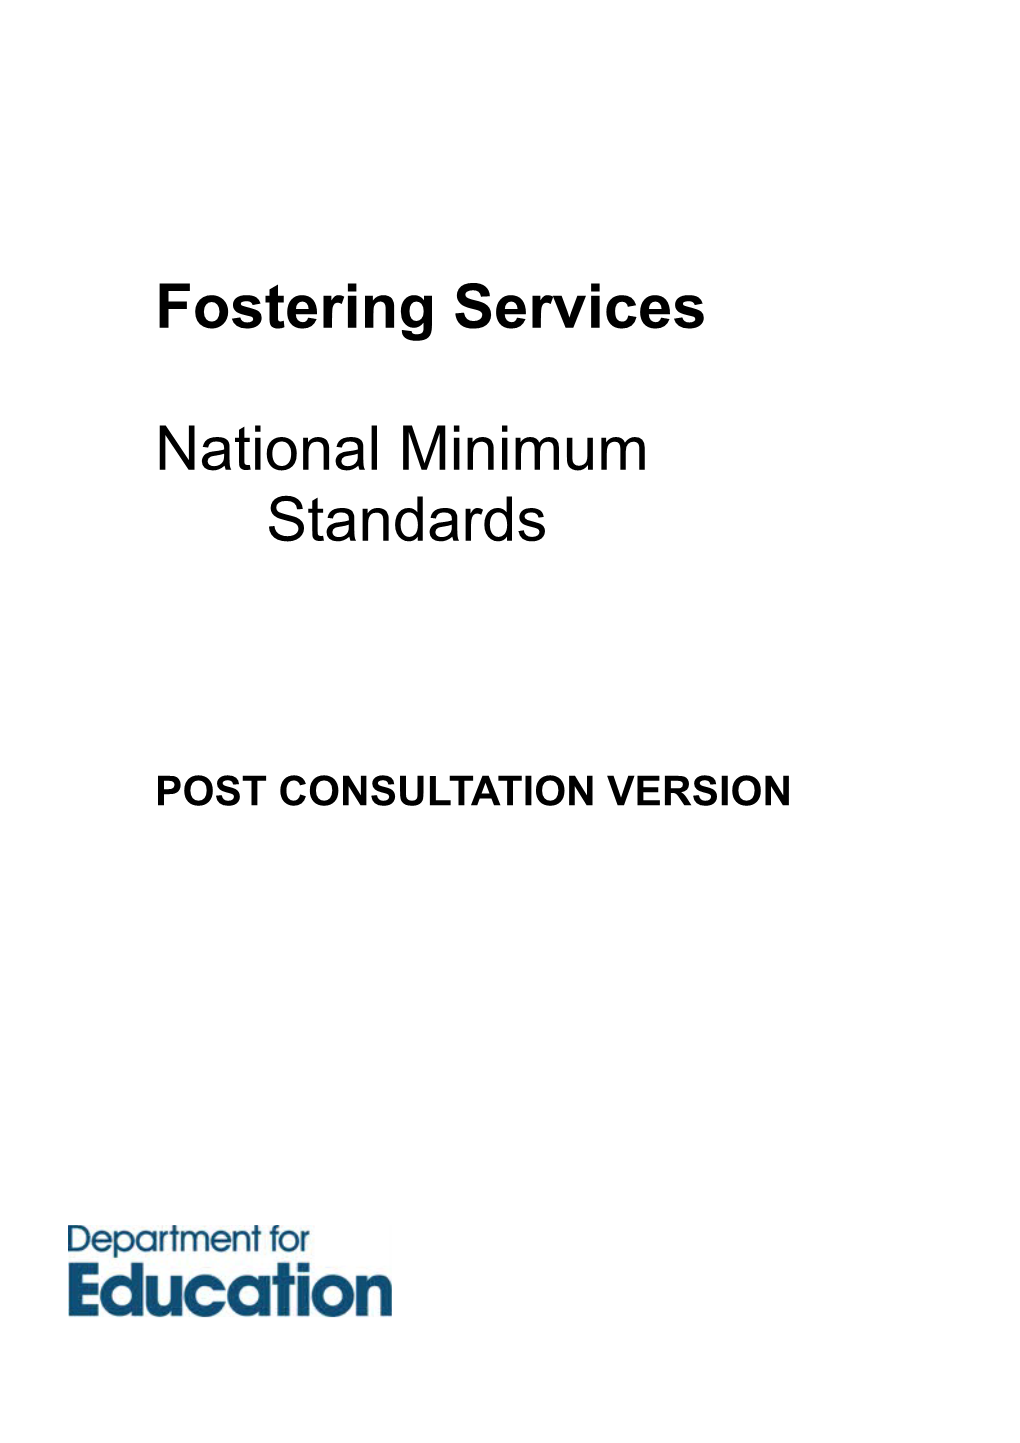 Fostering Services